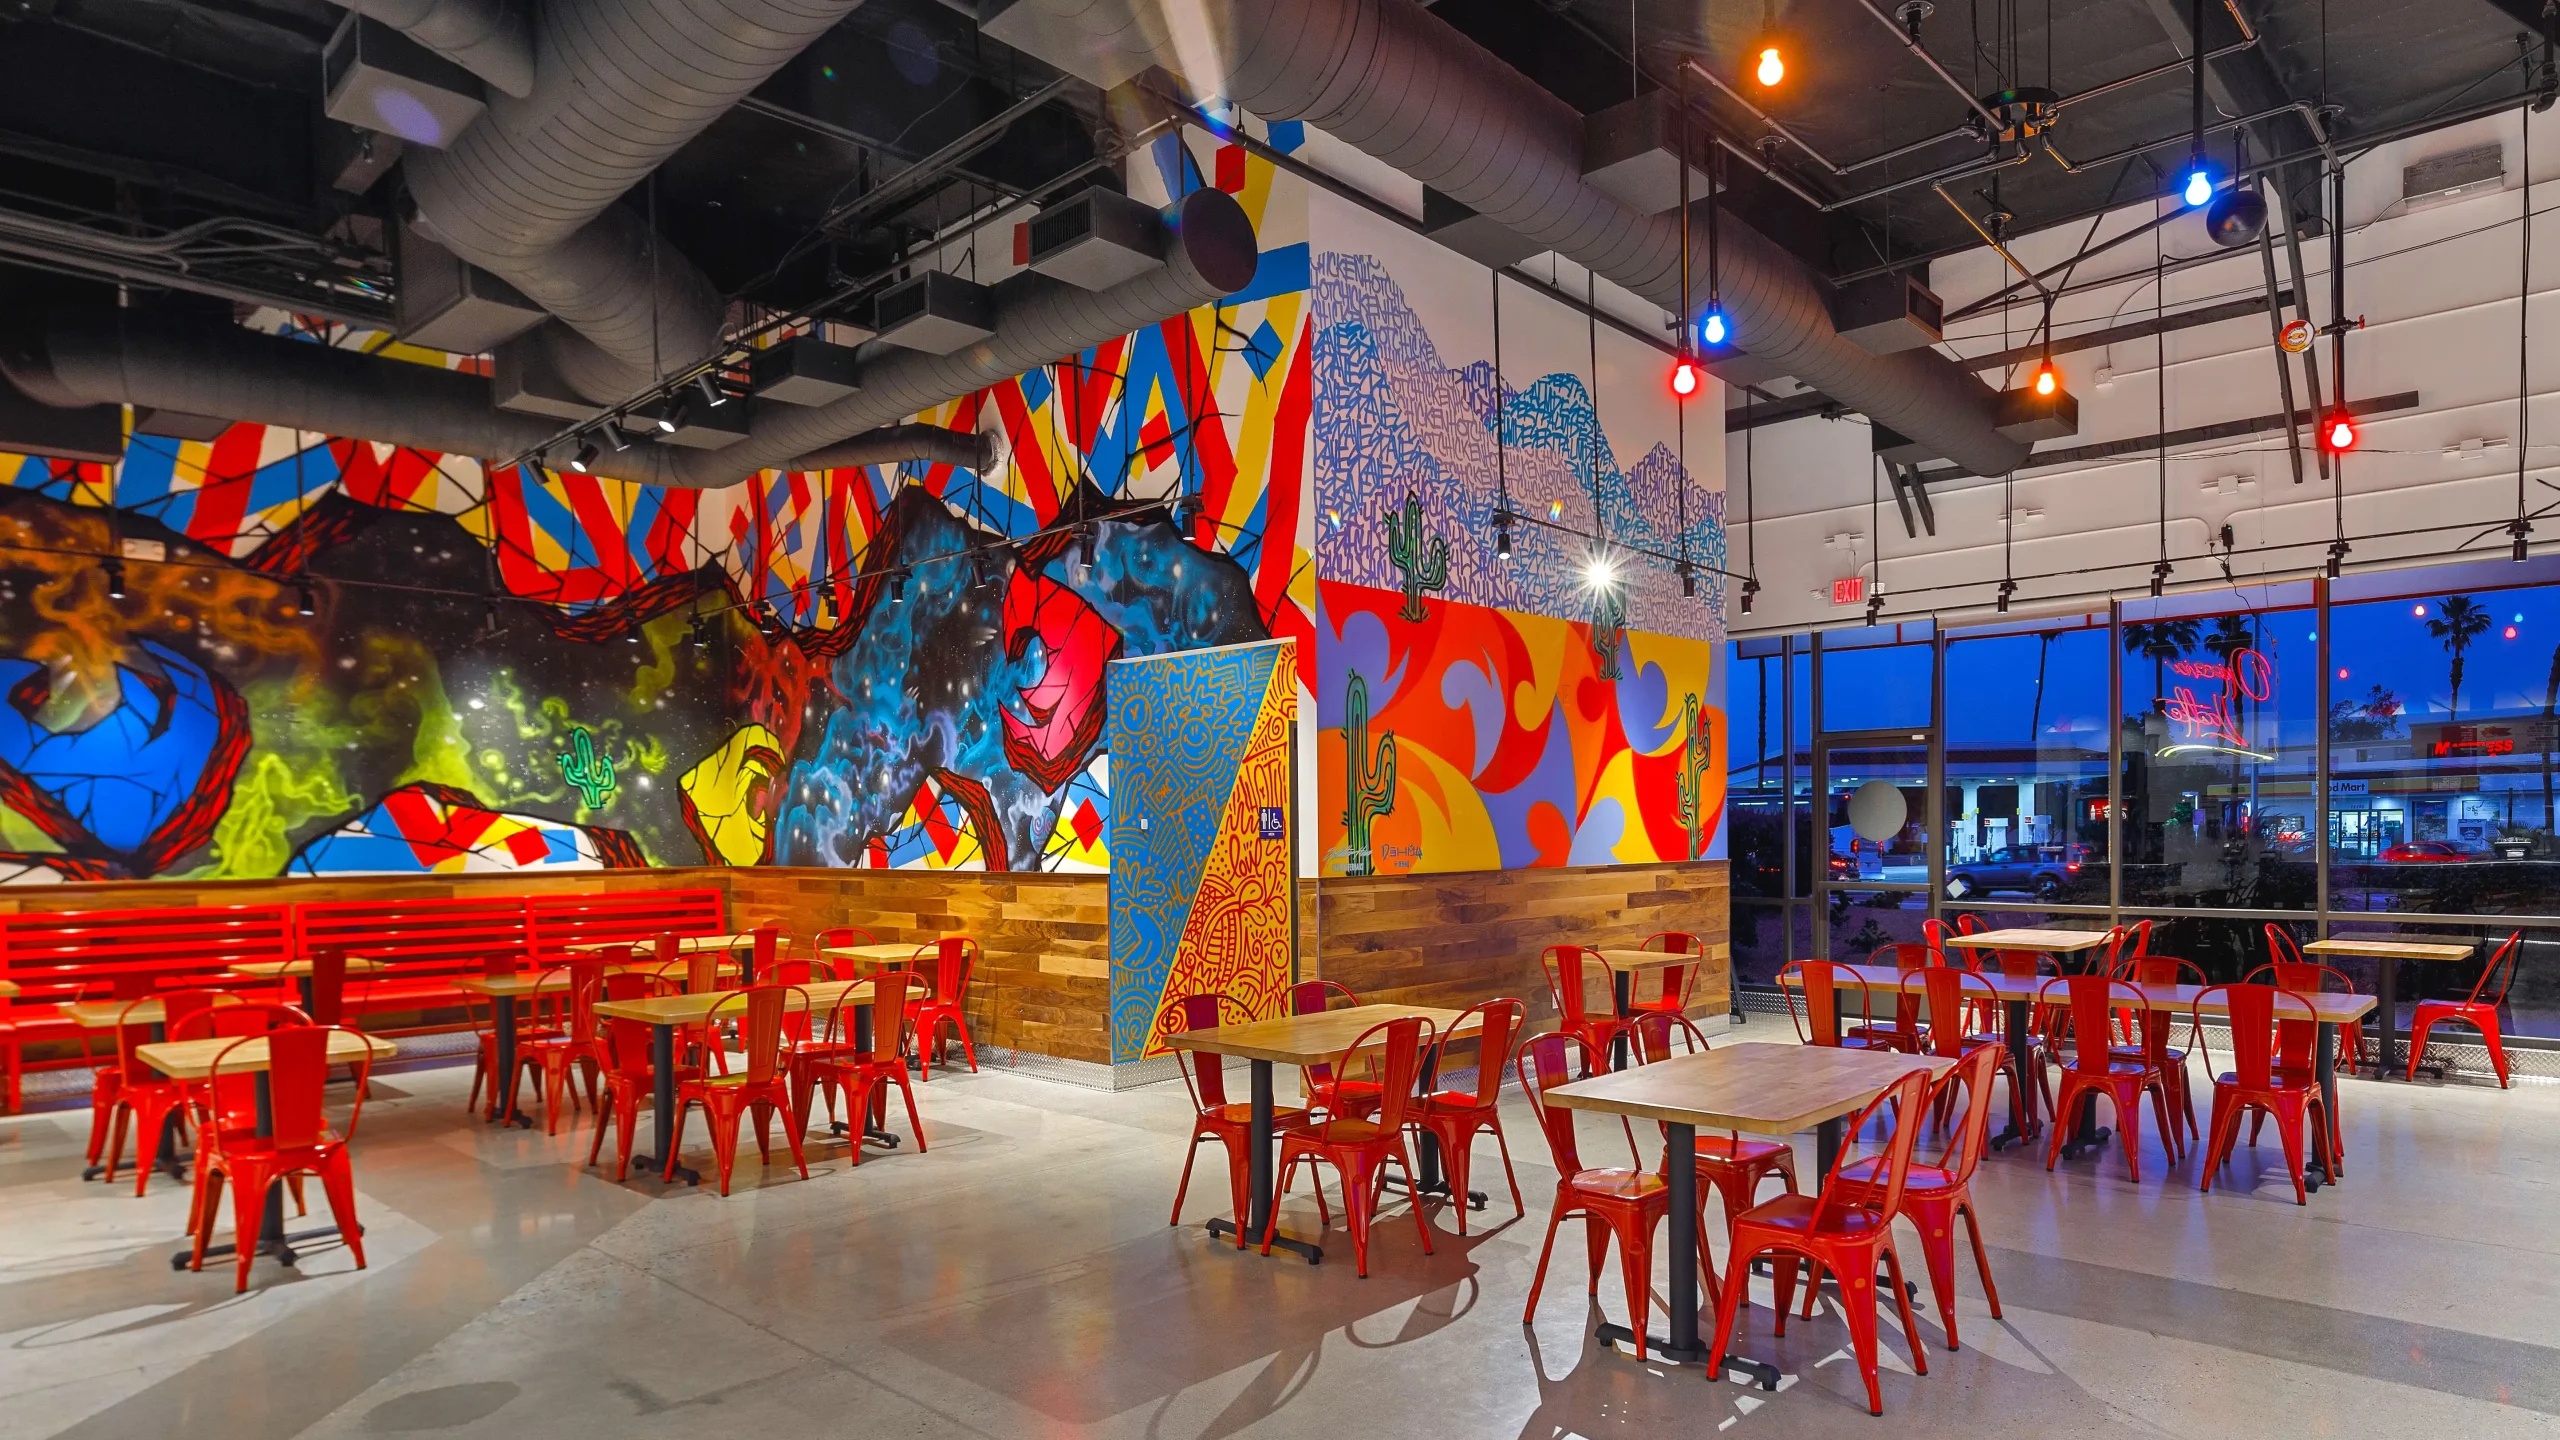 Wide view of the interior of Dave's Hot Chicken in Palm Desert, California, showcasing an expansive, colorful mural with abstract and cosmic designs on the main wall. The dining area features sleek wooden tables and vivid red chairs under eclectic, colorful hanging lights. Large windows offer a view of the street outside, illuminated by the evening lights.